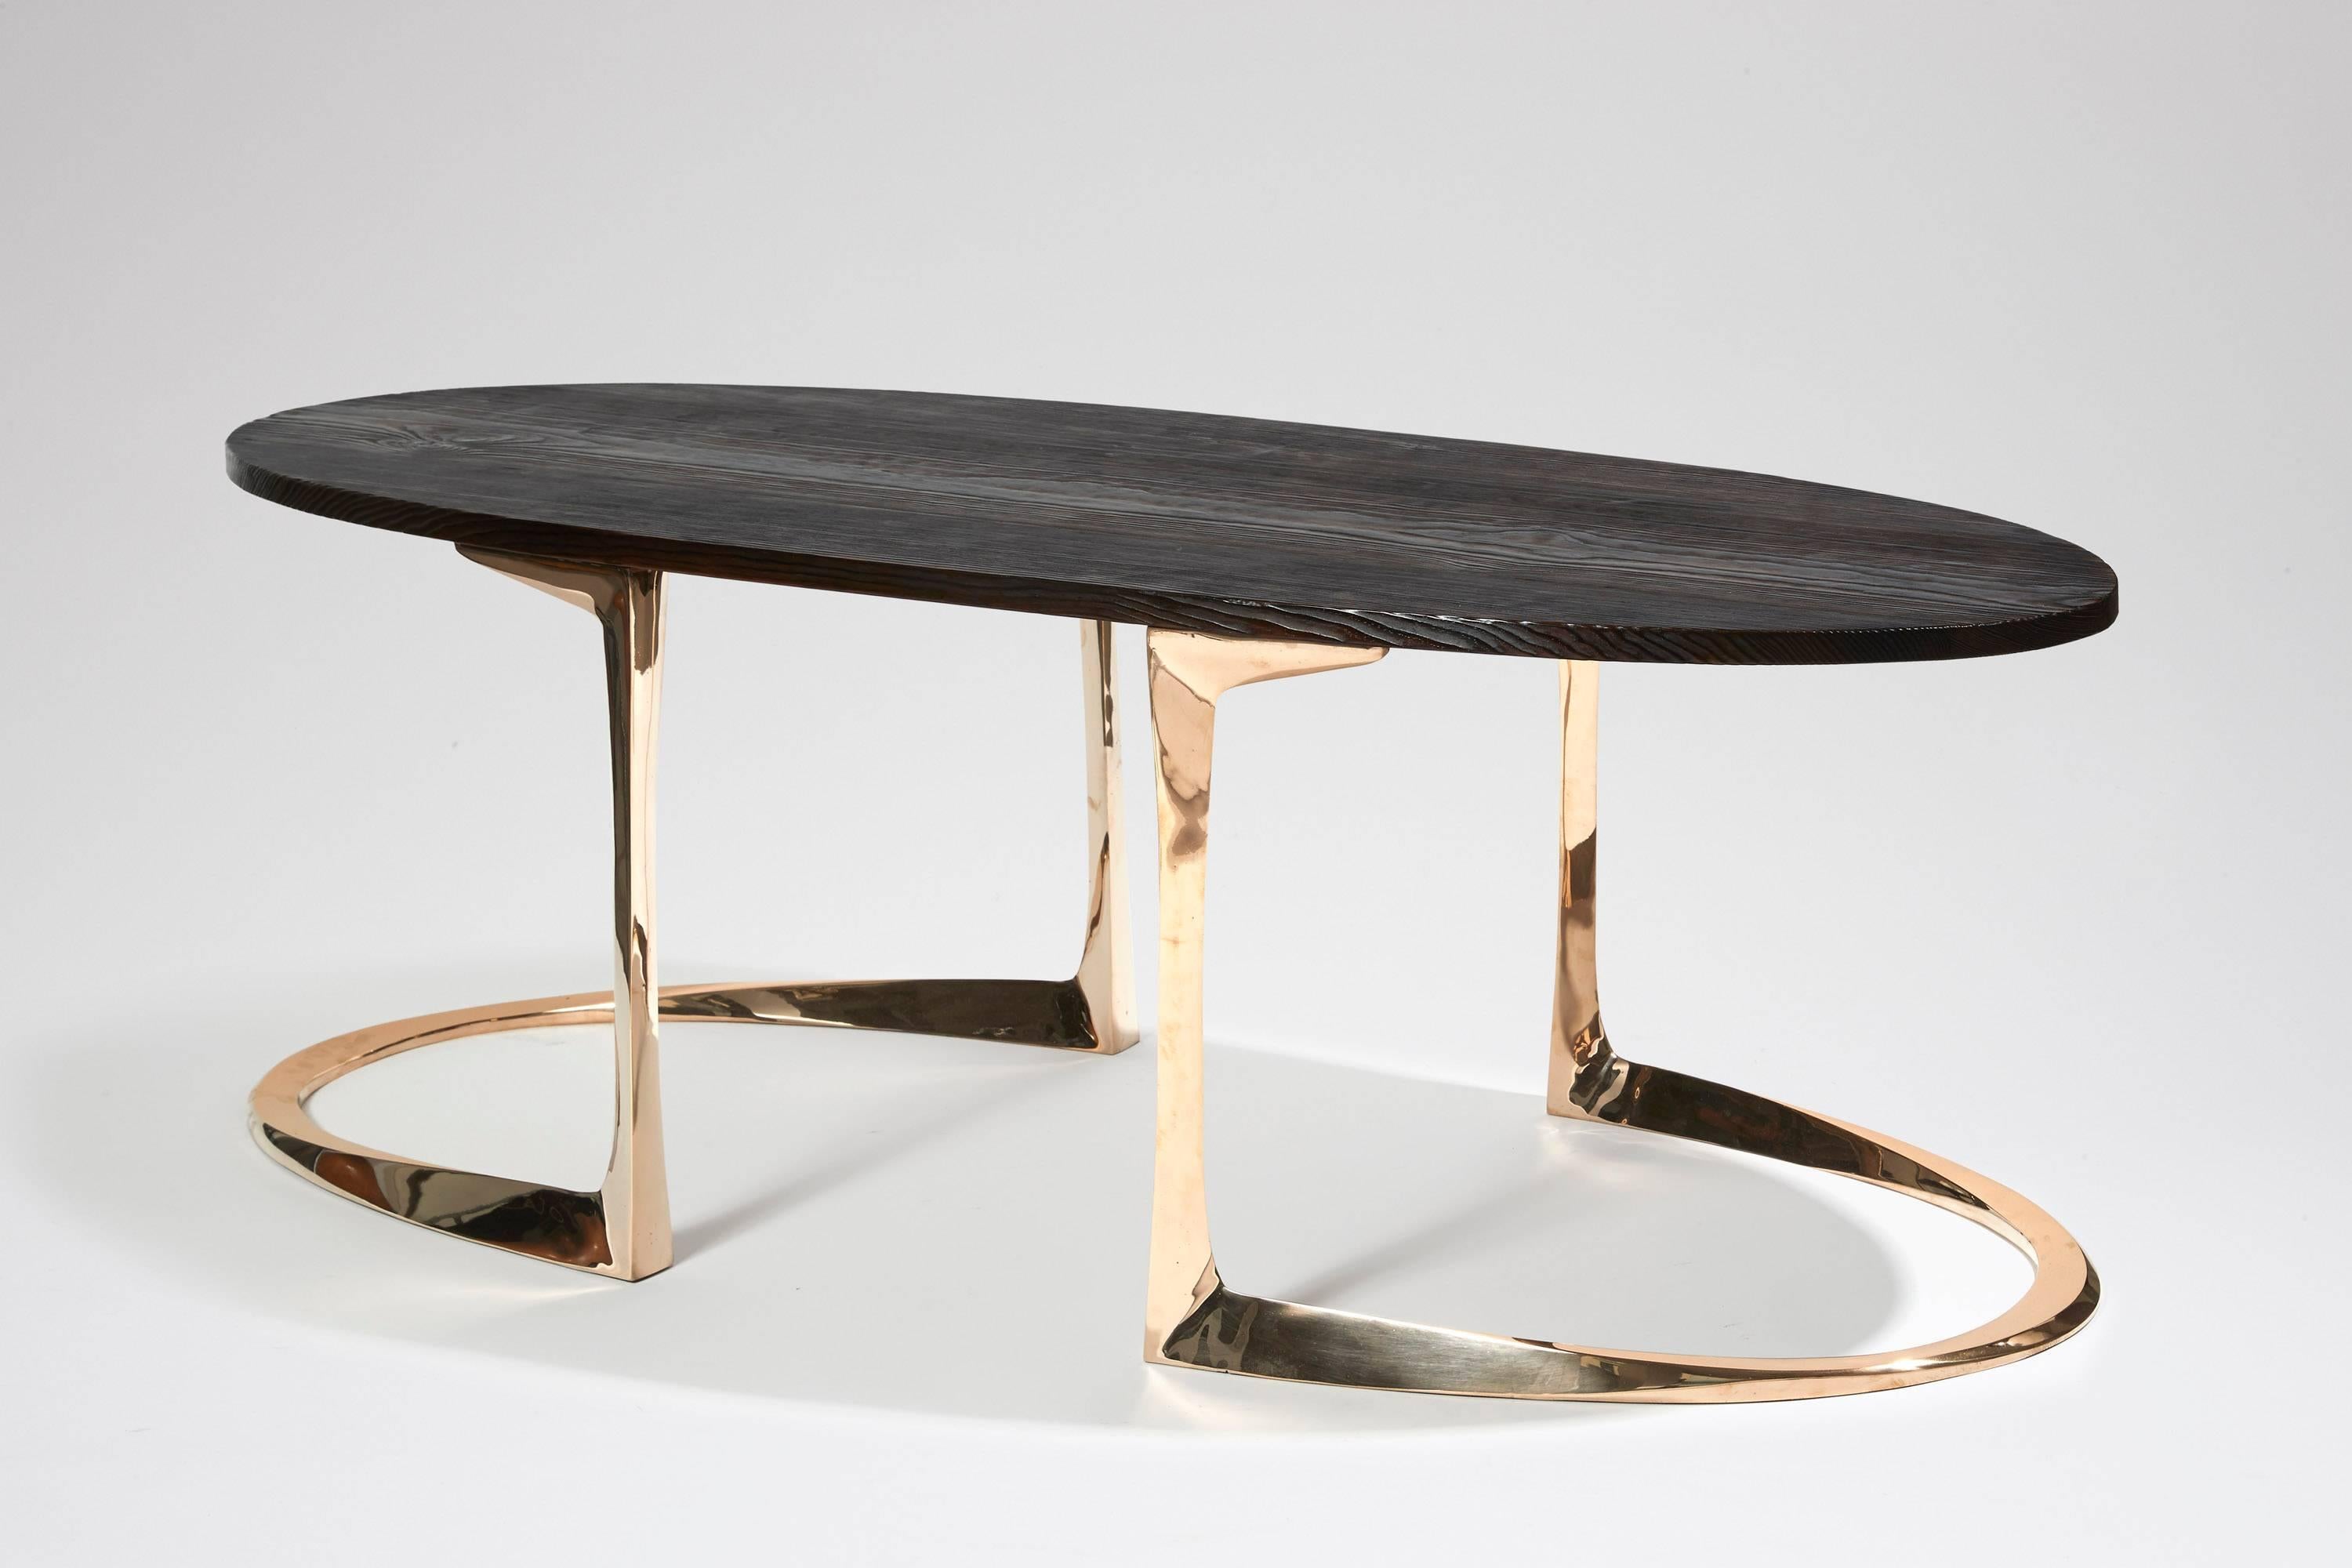 A polished and varnished bronze coffee table with a burnt pinewood oval top, the base with the Anasthasia Millot's signature.
Designed and executed in 2017 with burnt pinewood exclusively with WH Studio.

 